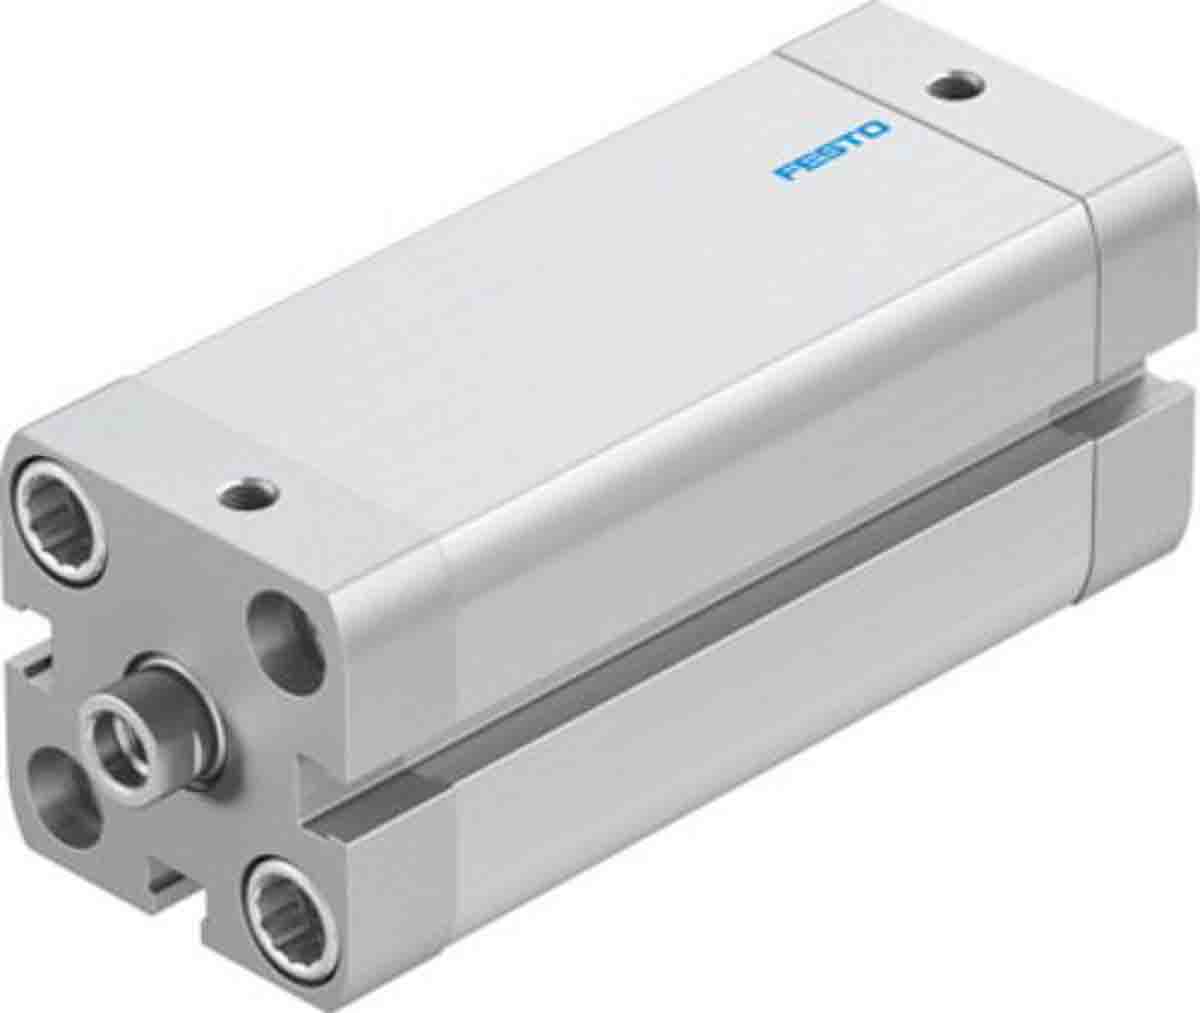 Festo Pneumatic Compact Cylinder - 577181, 25mm Bore, 60mm Stroke, ADN Series, Double Acting